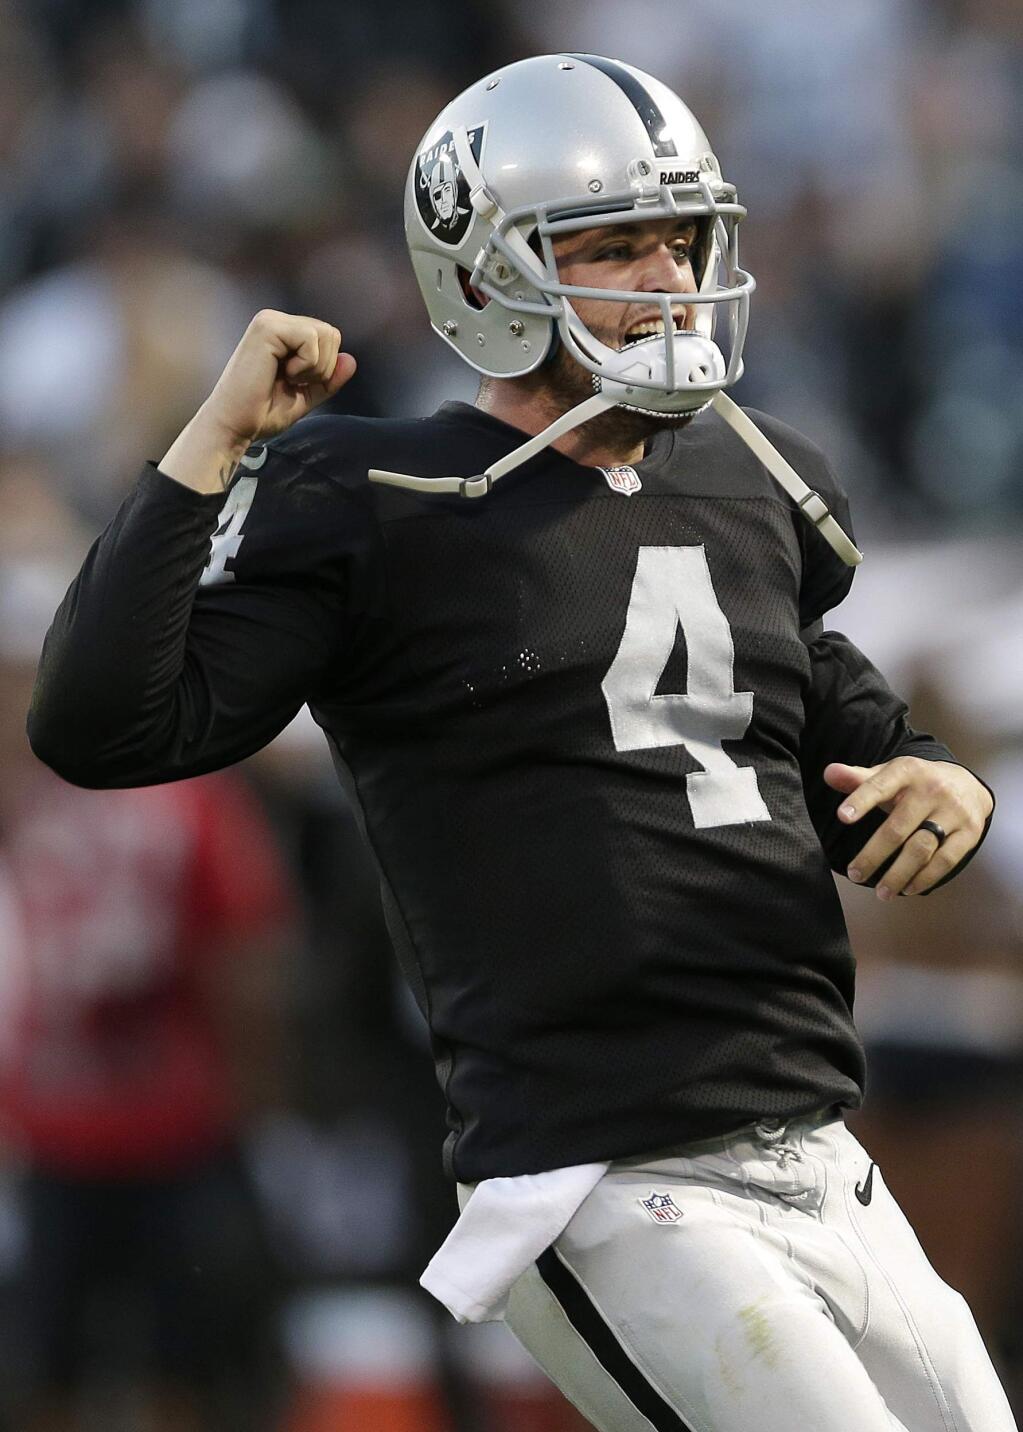 Oakland Raiders quarterback Derek Carr (4) celebrates after throwing a 36-yard touchdown pass to wide receiver Denarius Moore during the first quarter of an NFL preseason football game against the Seattle Seahawks in Oakland, Calif., Thursday, Aug. 28, 2014. (AP Photo/Marcio Jose Sanchez)